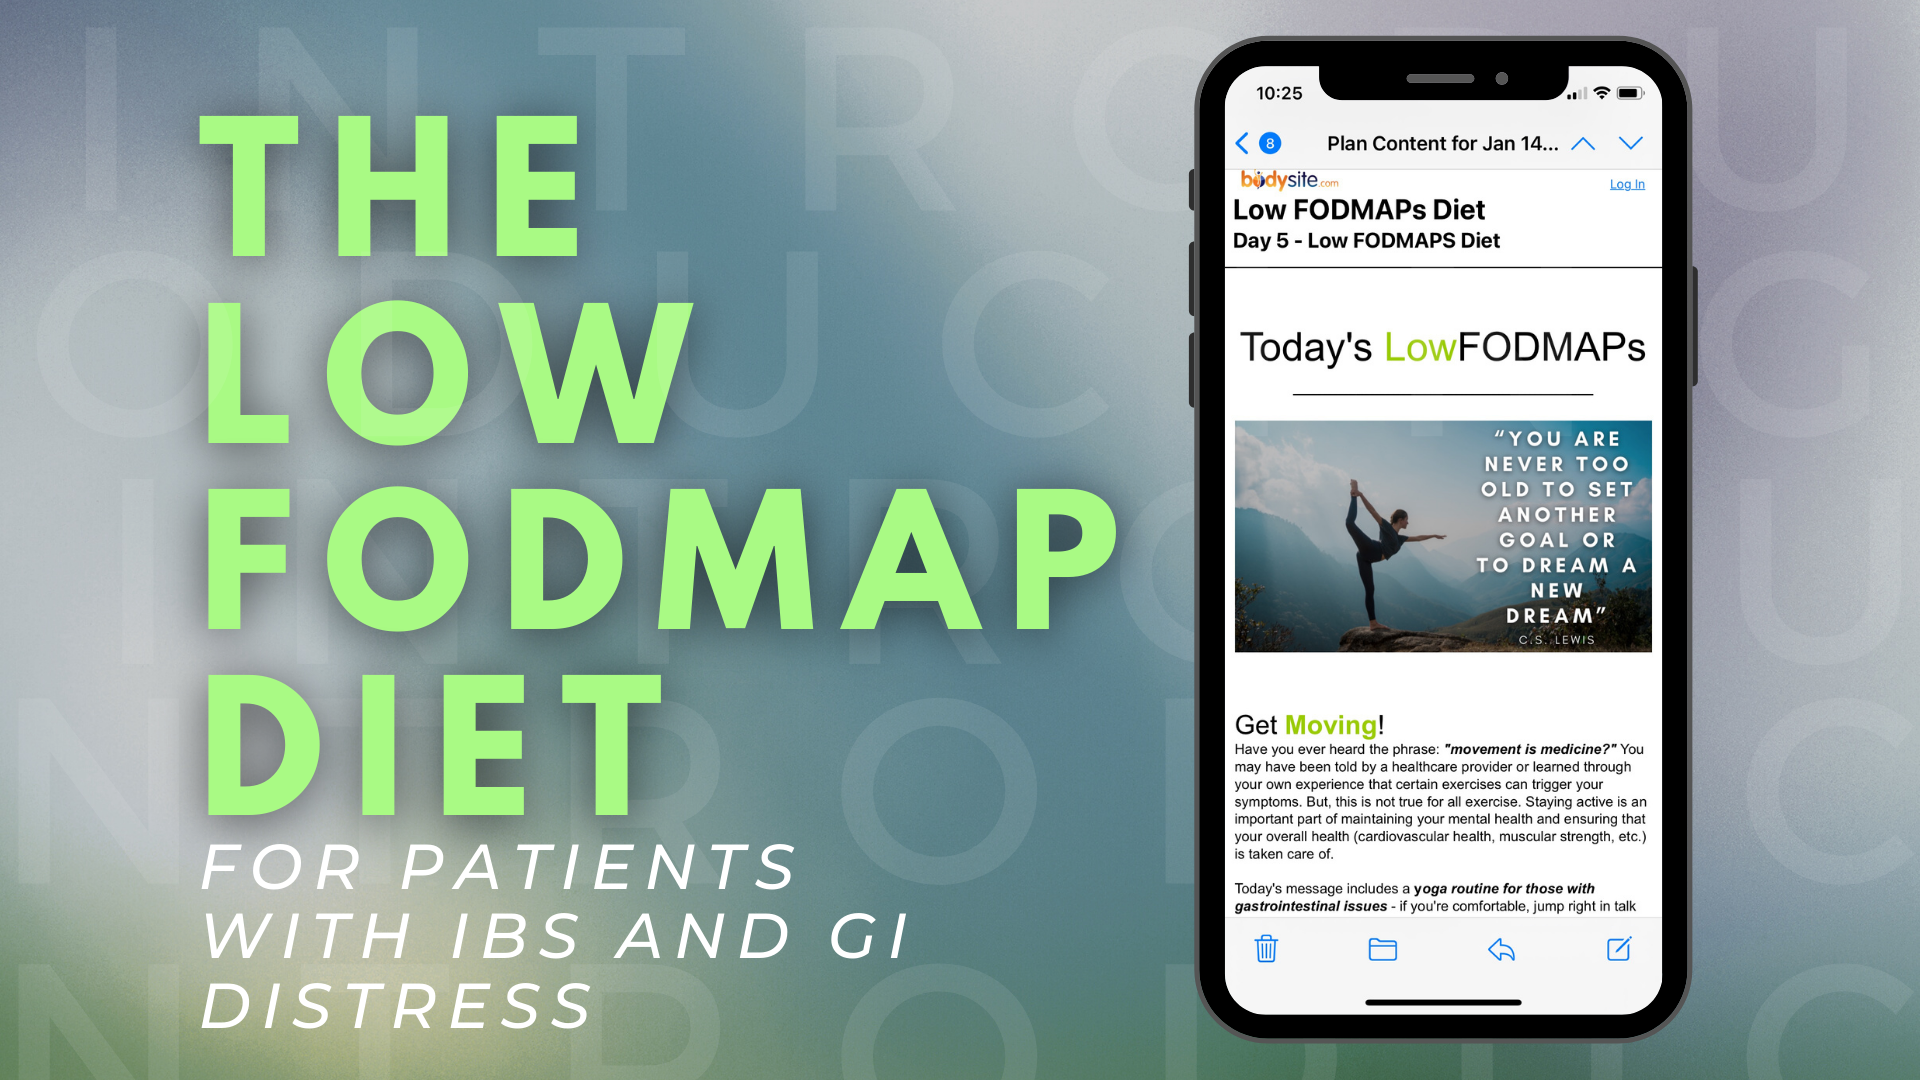 treating-patients-with-ibs-remotely-using-the-low-fodmap-protocol